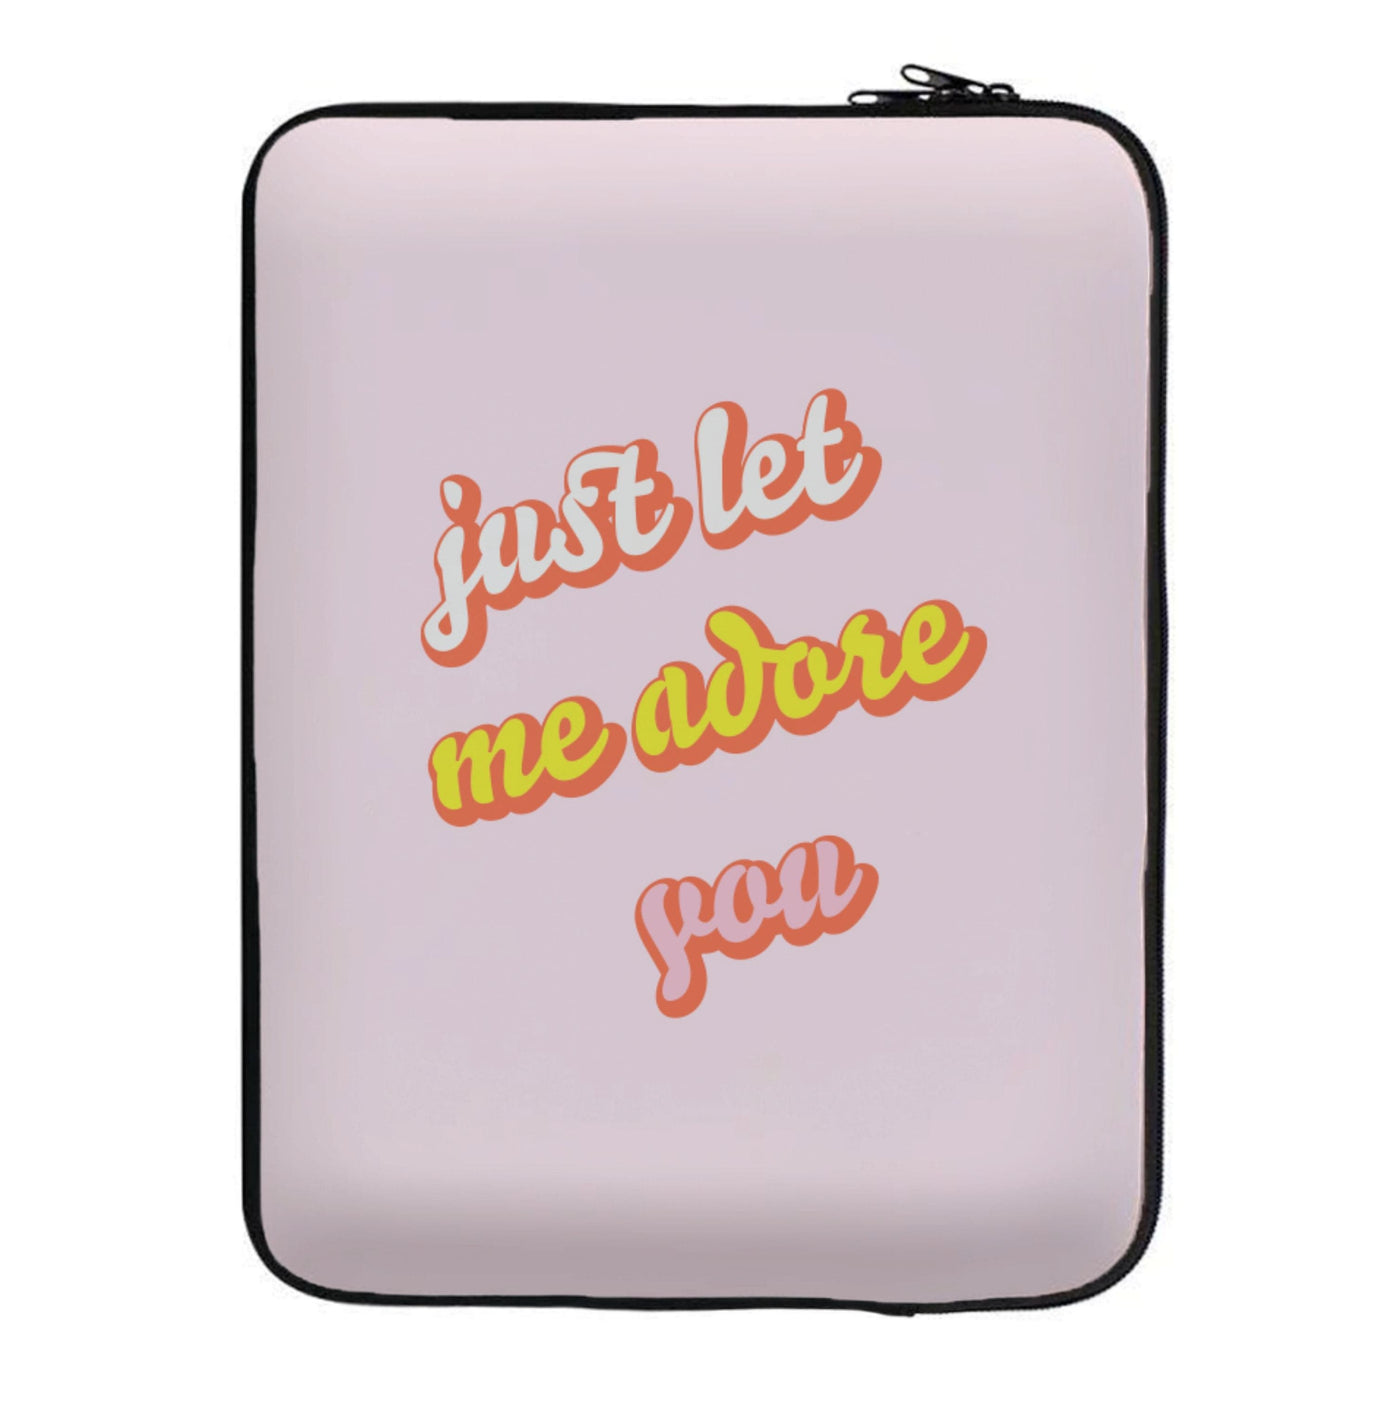 Just Let Me Adore You - Harry Laptop Sleeve